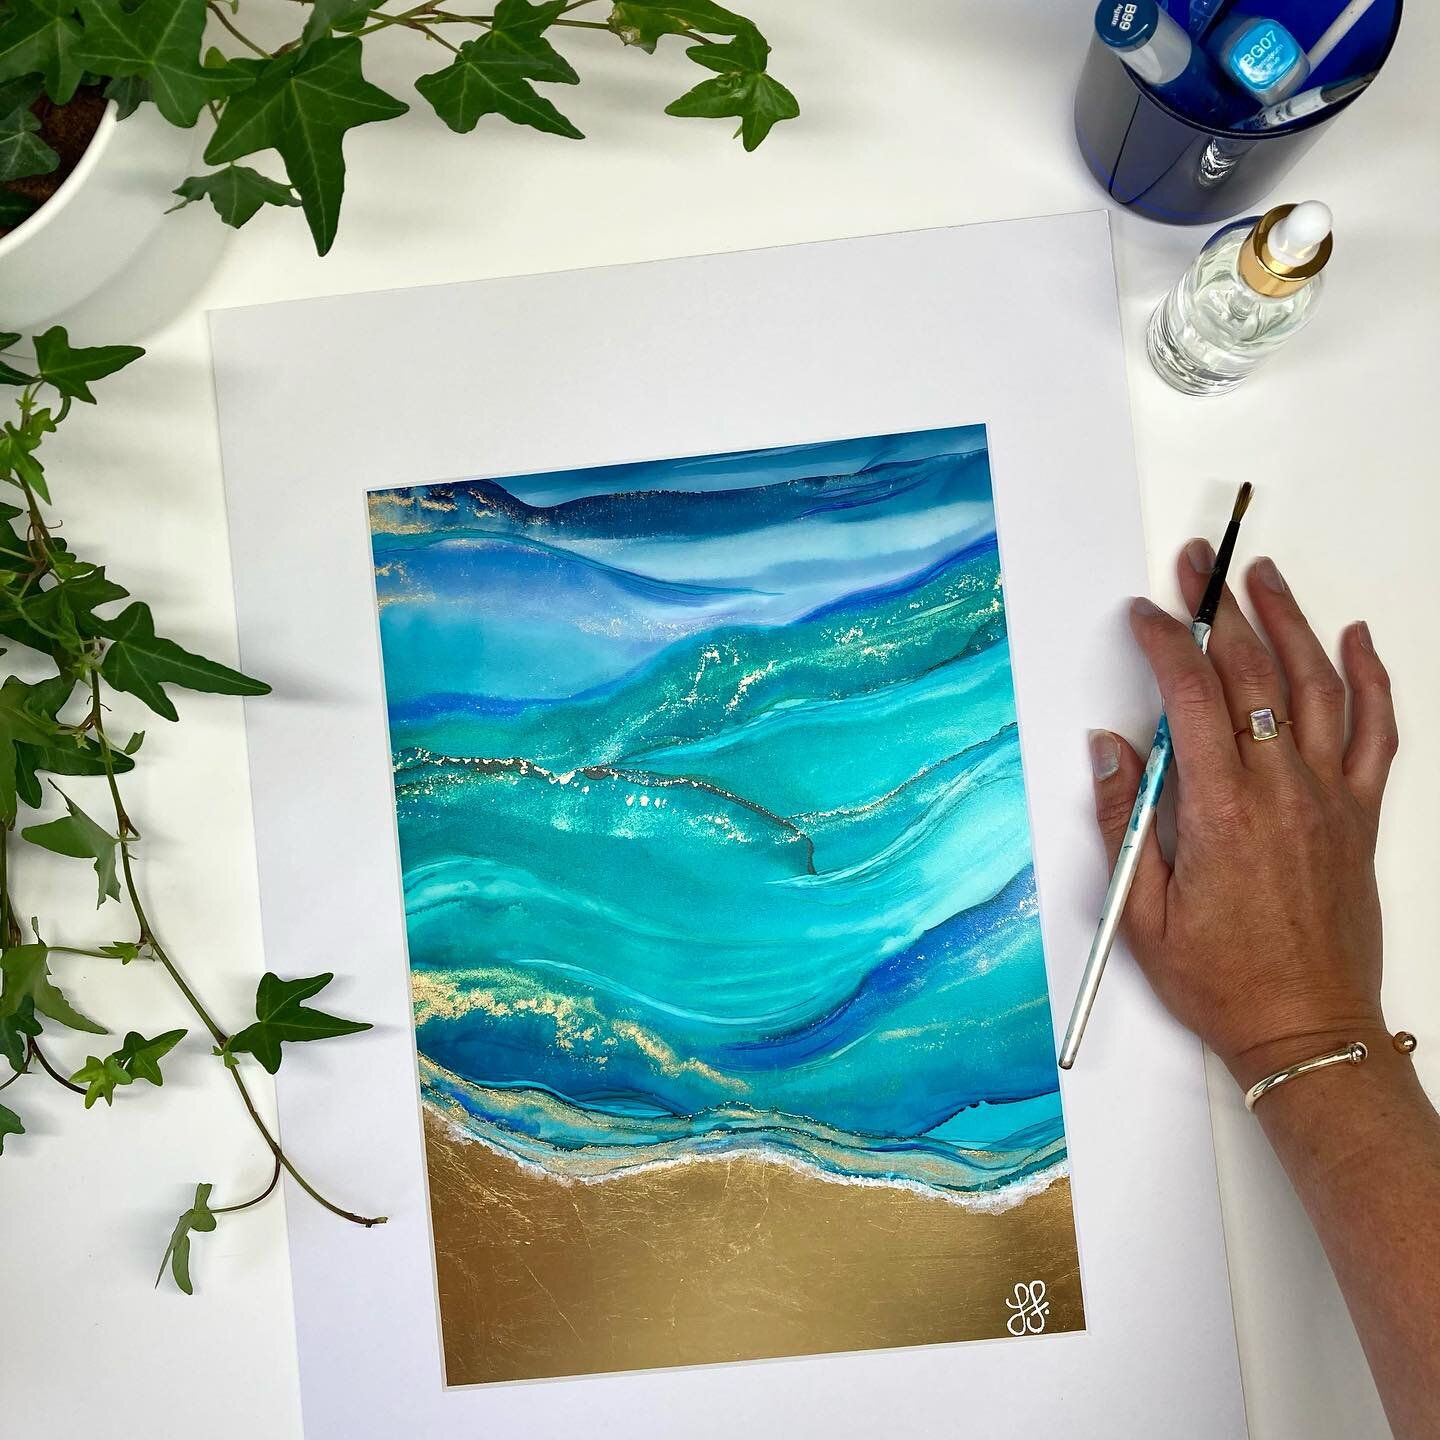 Water is my favourite thing to paint 🥰 🌊

I never tire of creating waves and ripples and taking inspiration from sunlight glistening on water. I find the movement of painting water to be incredibly relaxing and it&rsquo;s the style of artwork I alw